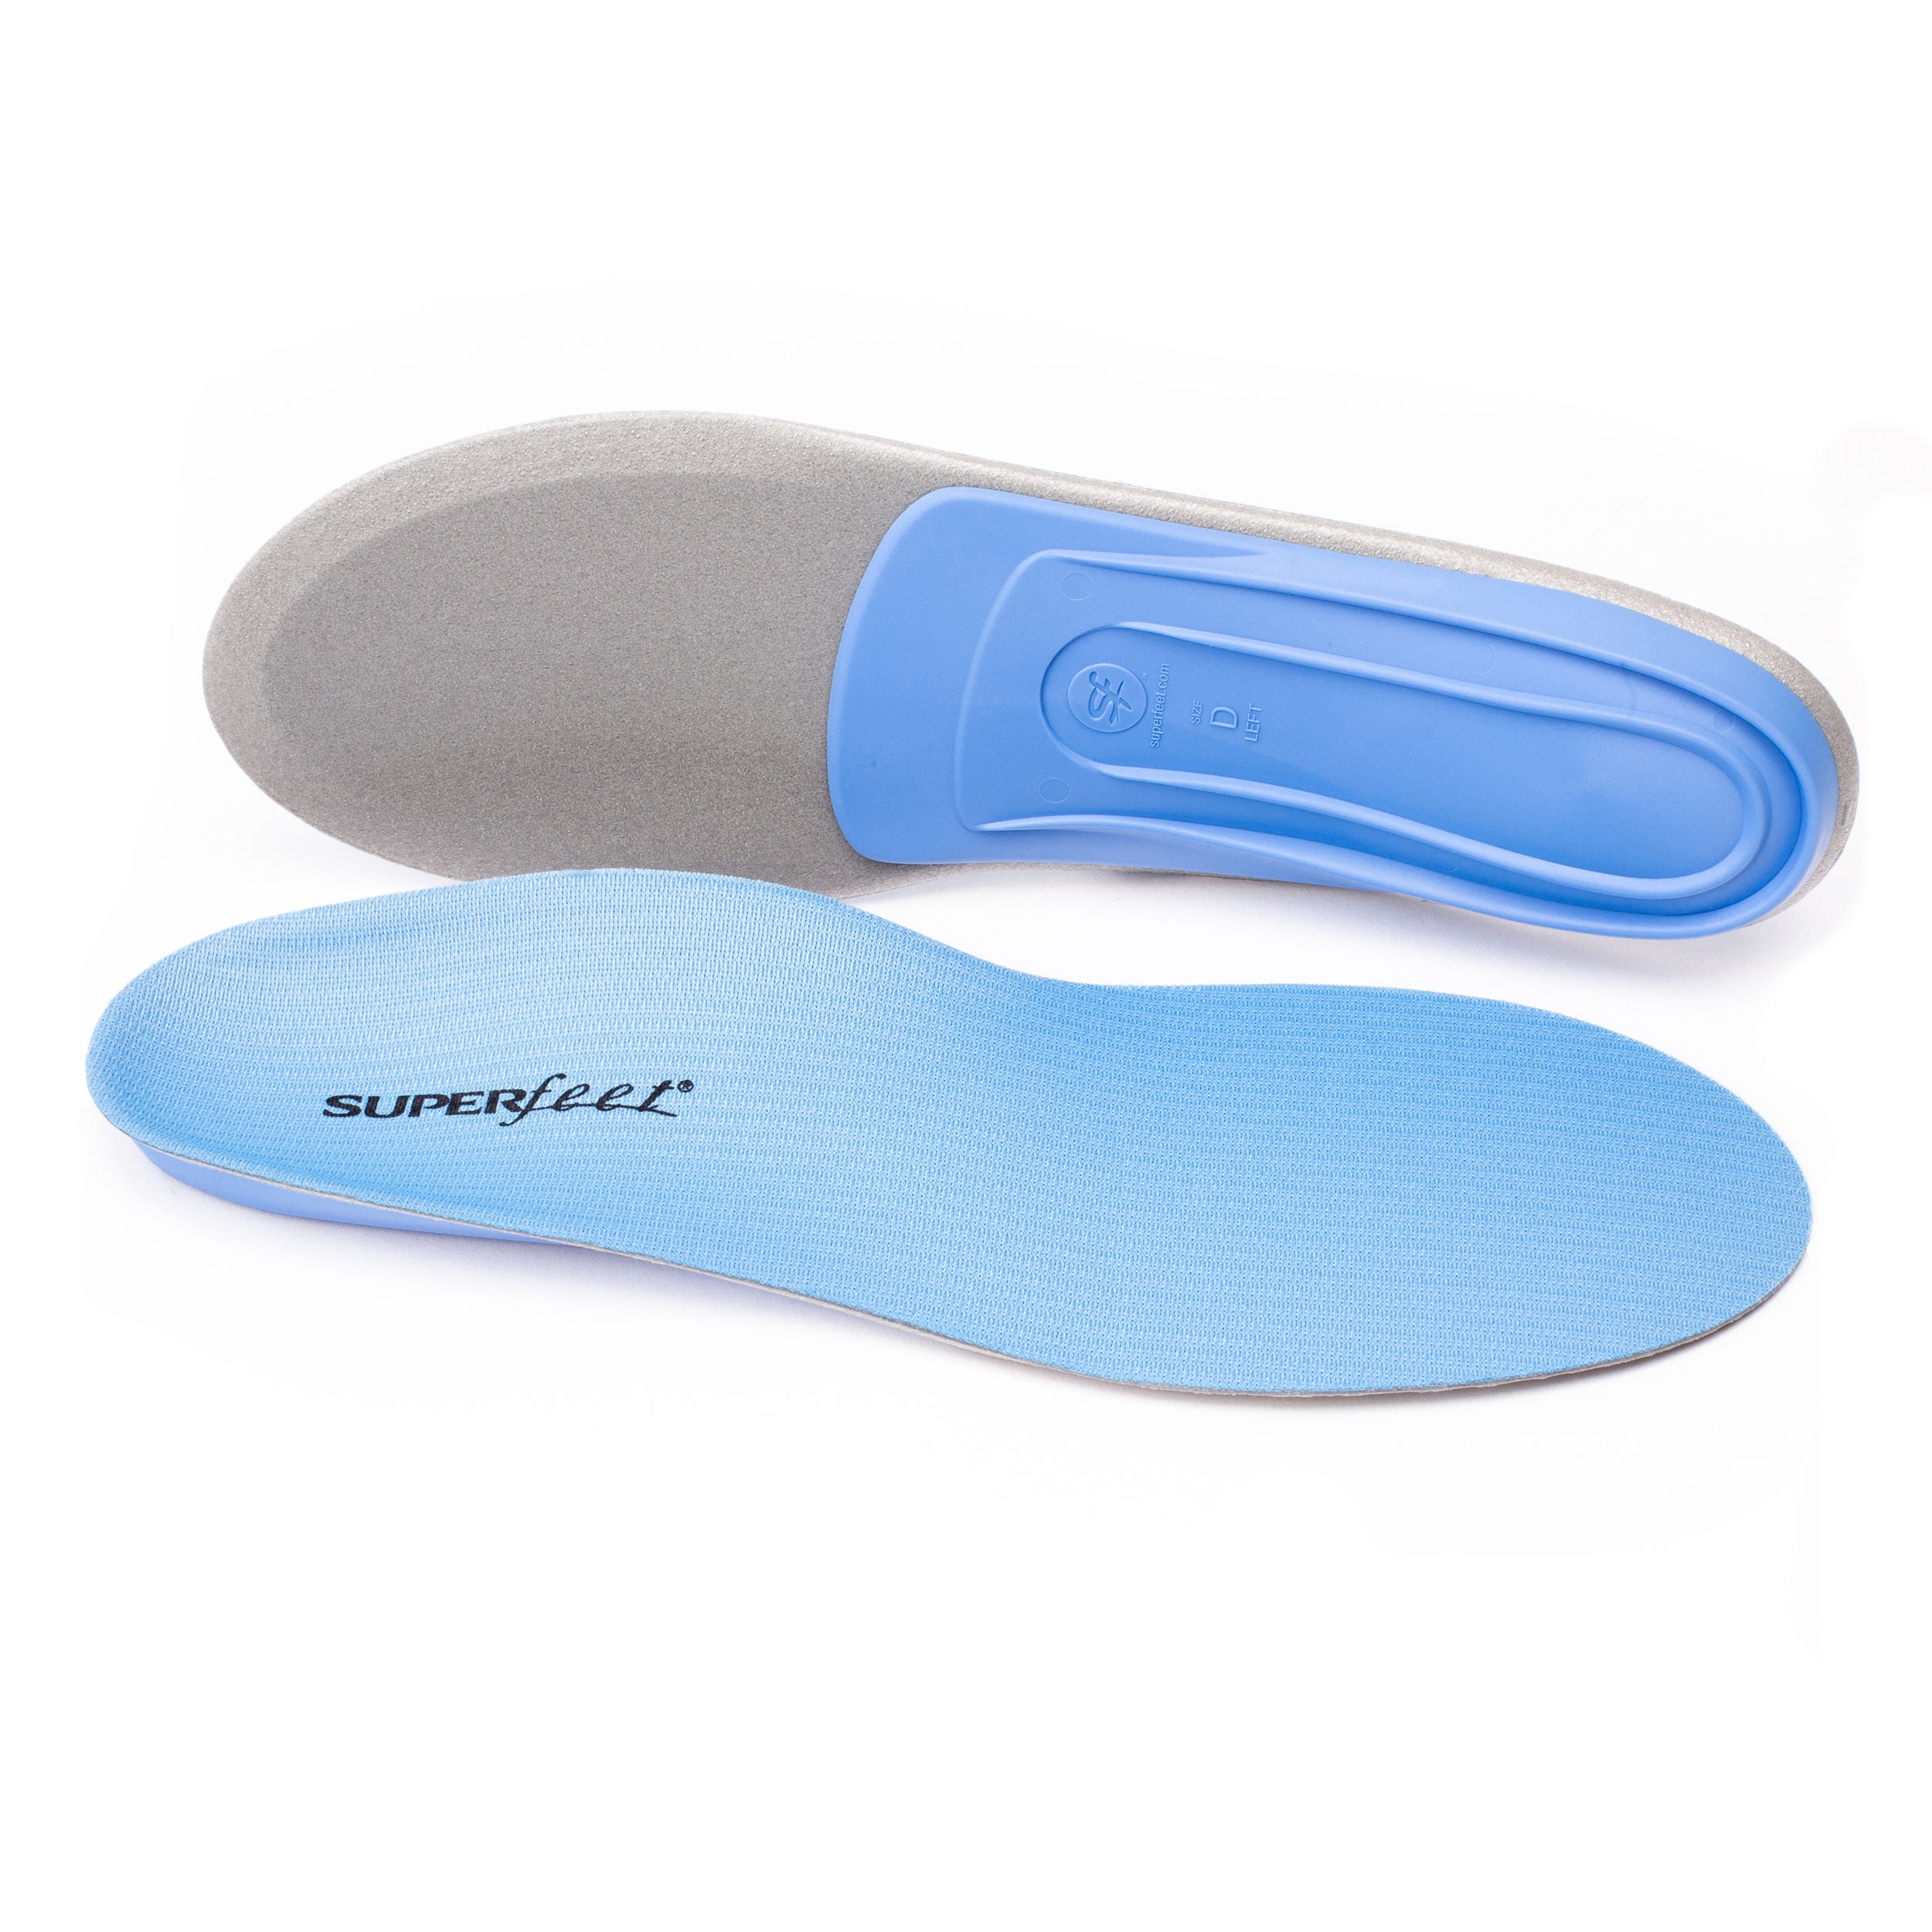 Buy > superfeet green heritage insoles > in stock